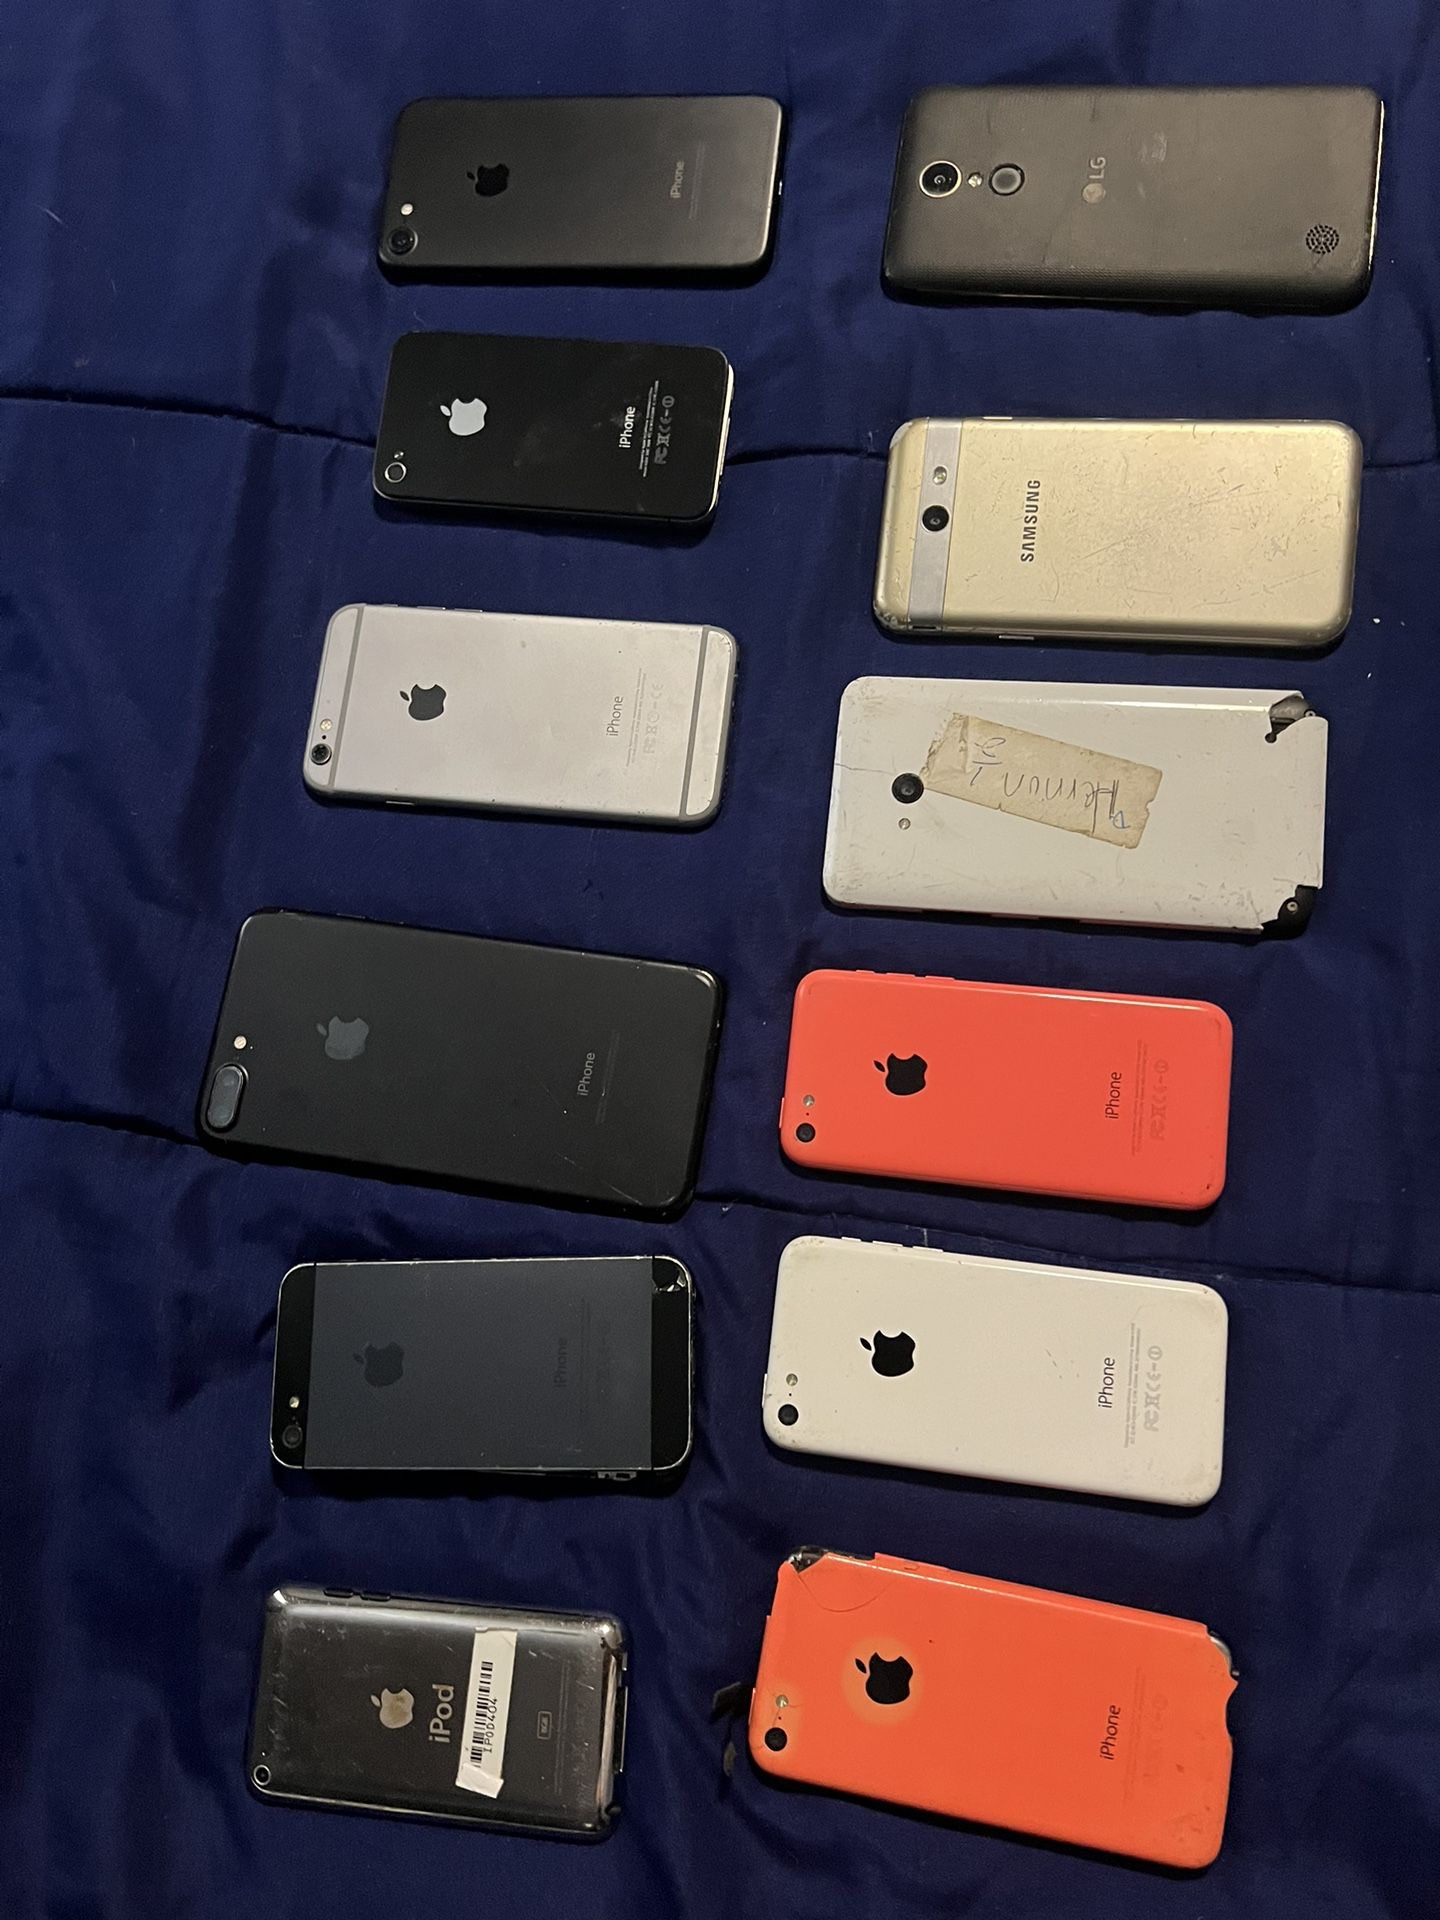 iPhones And Androids Phones For Parts Or Fix Them